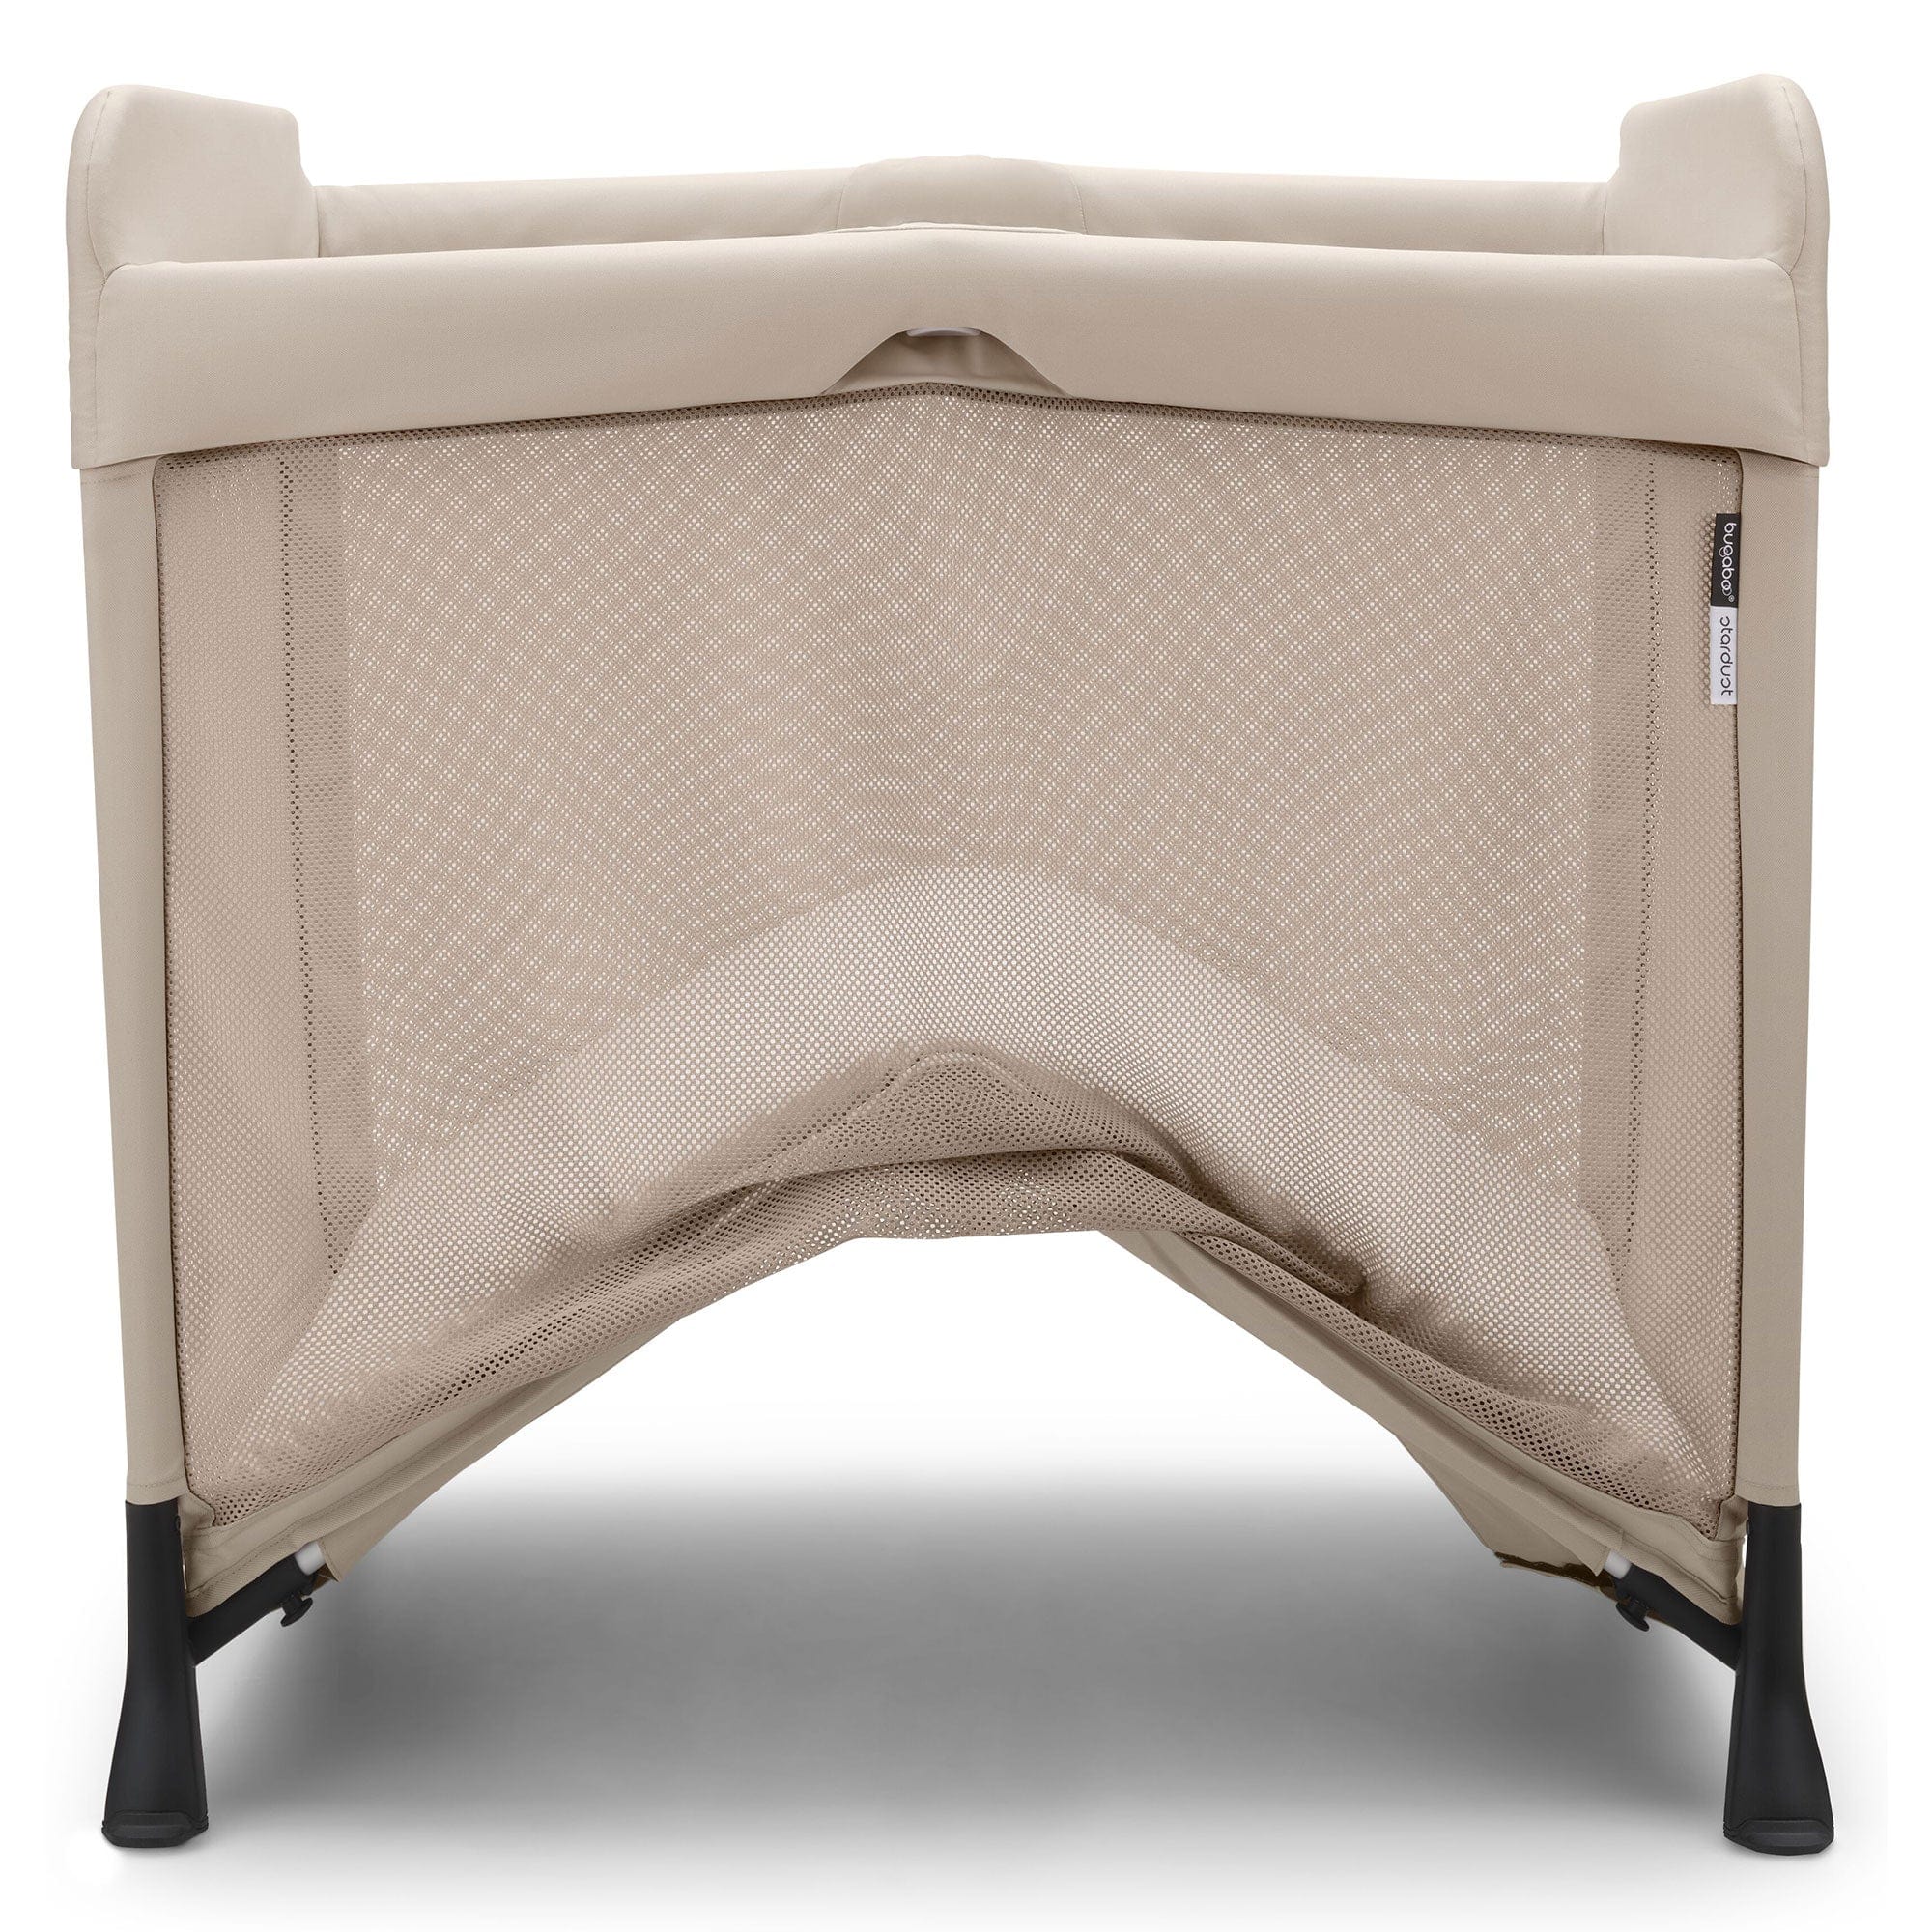 Bugaboo travel cots Bugaboo Stardust Travel Cot in Taupe 900005003